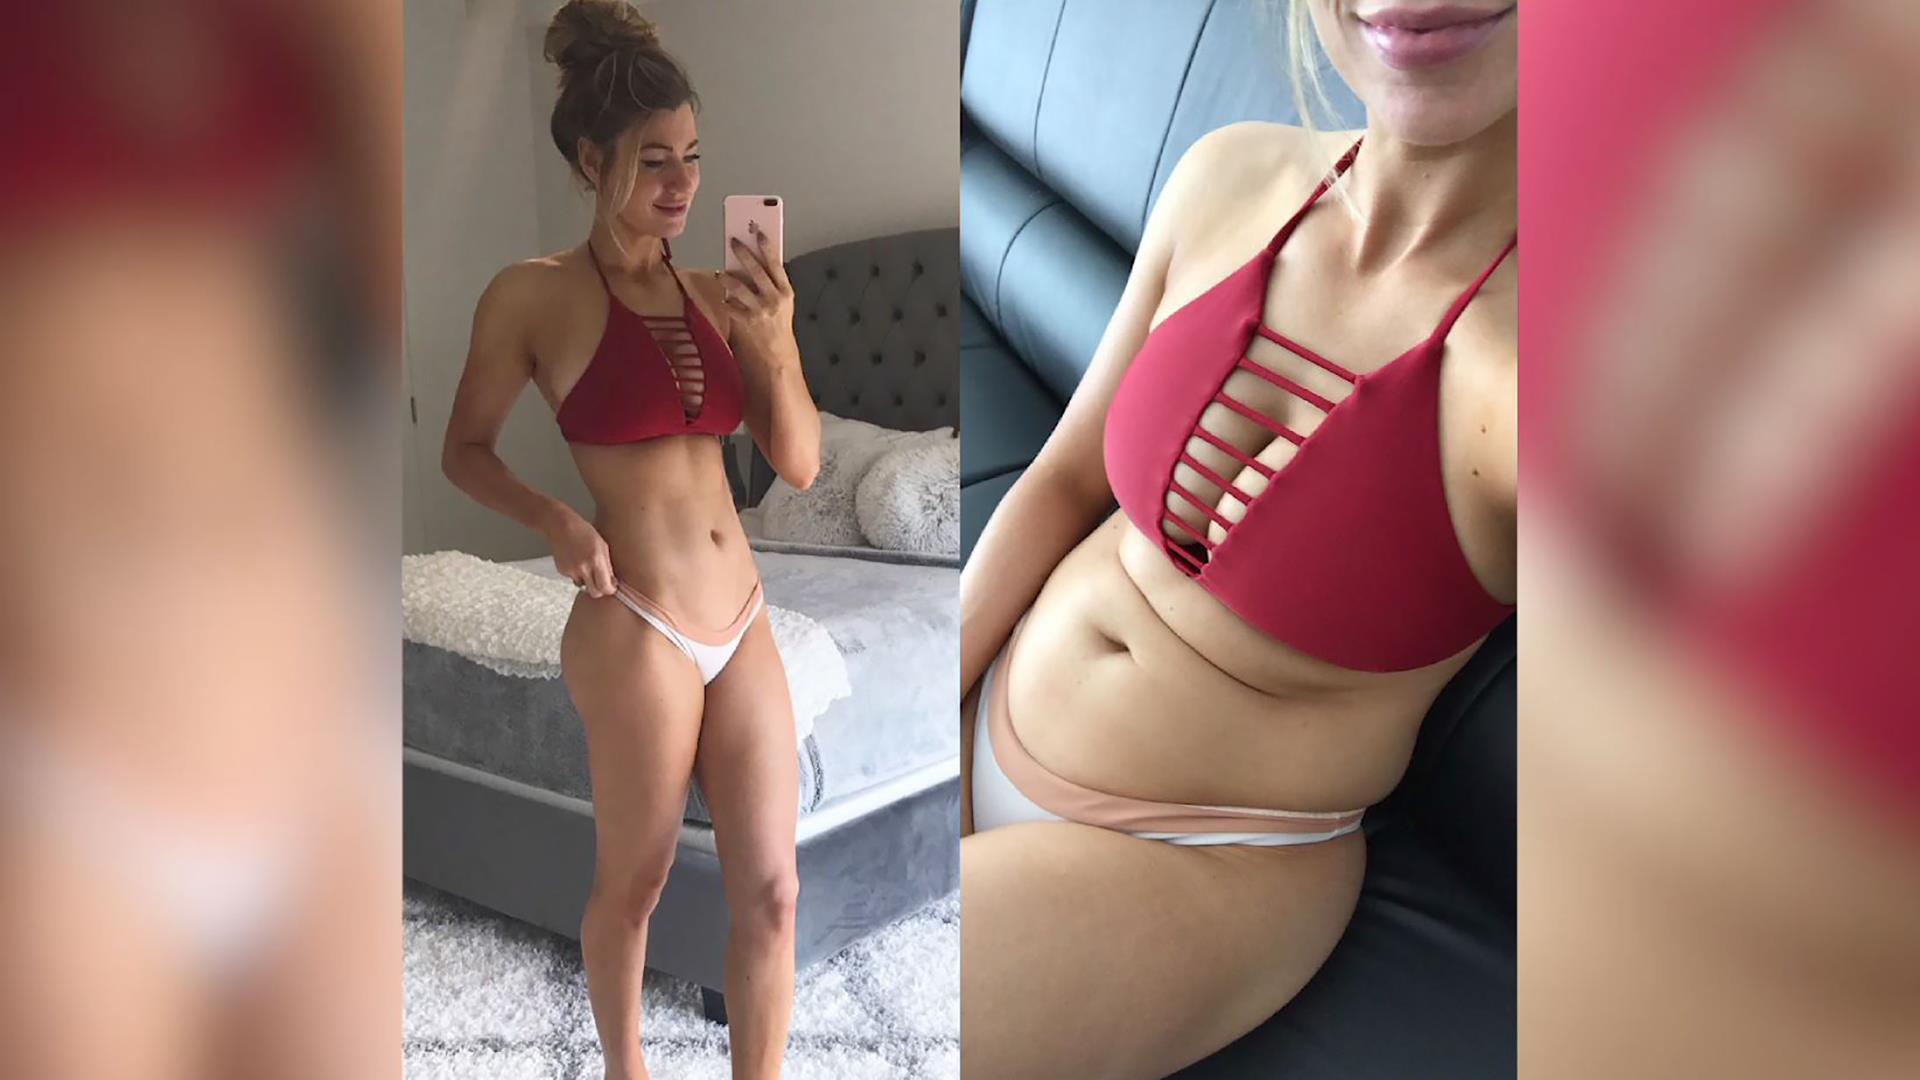 Fitness expert reveals what REALLY goes into taking a perfect Instagram pho...